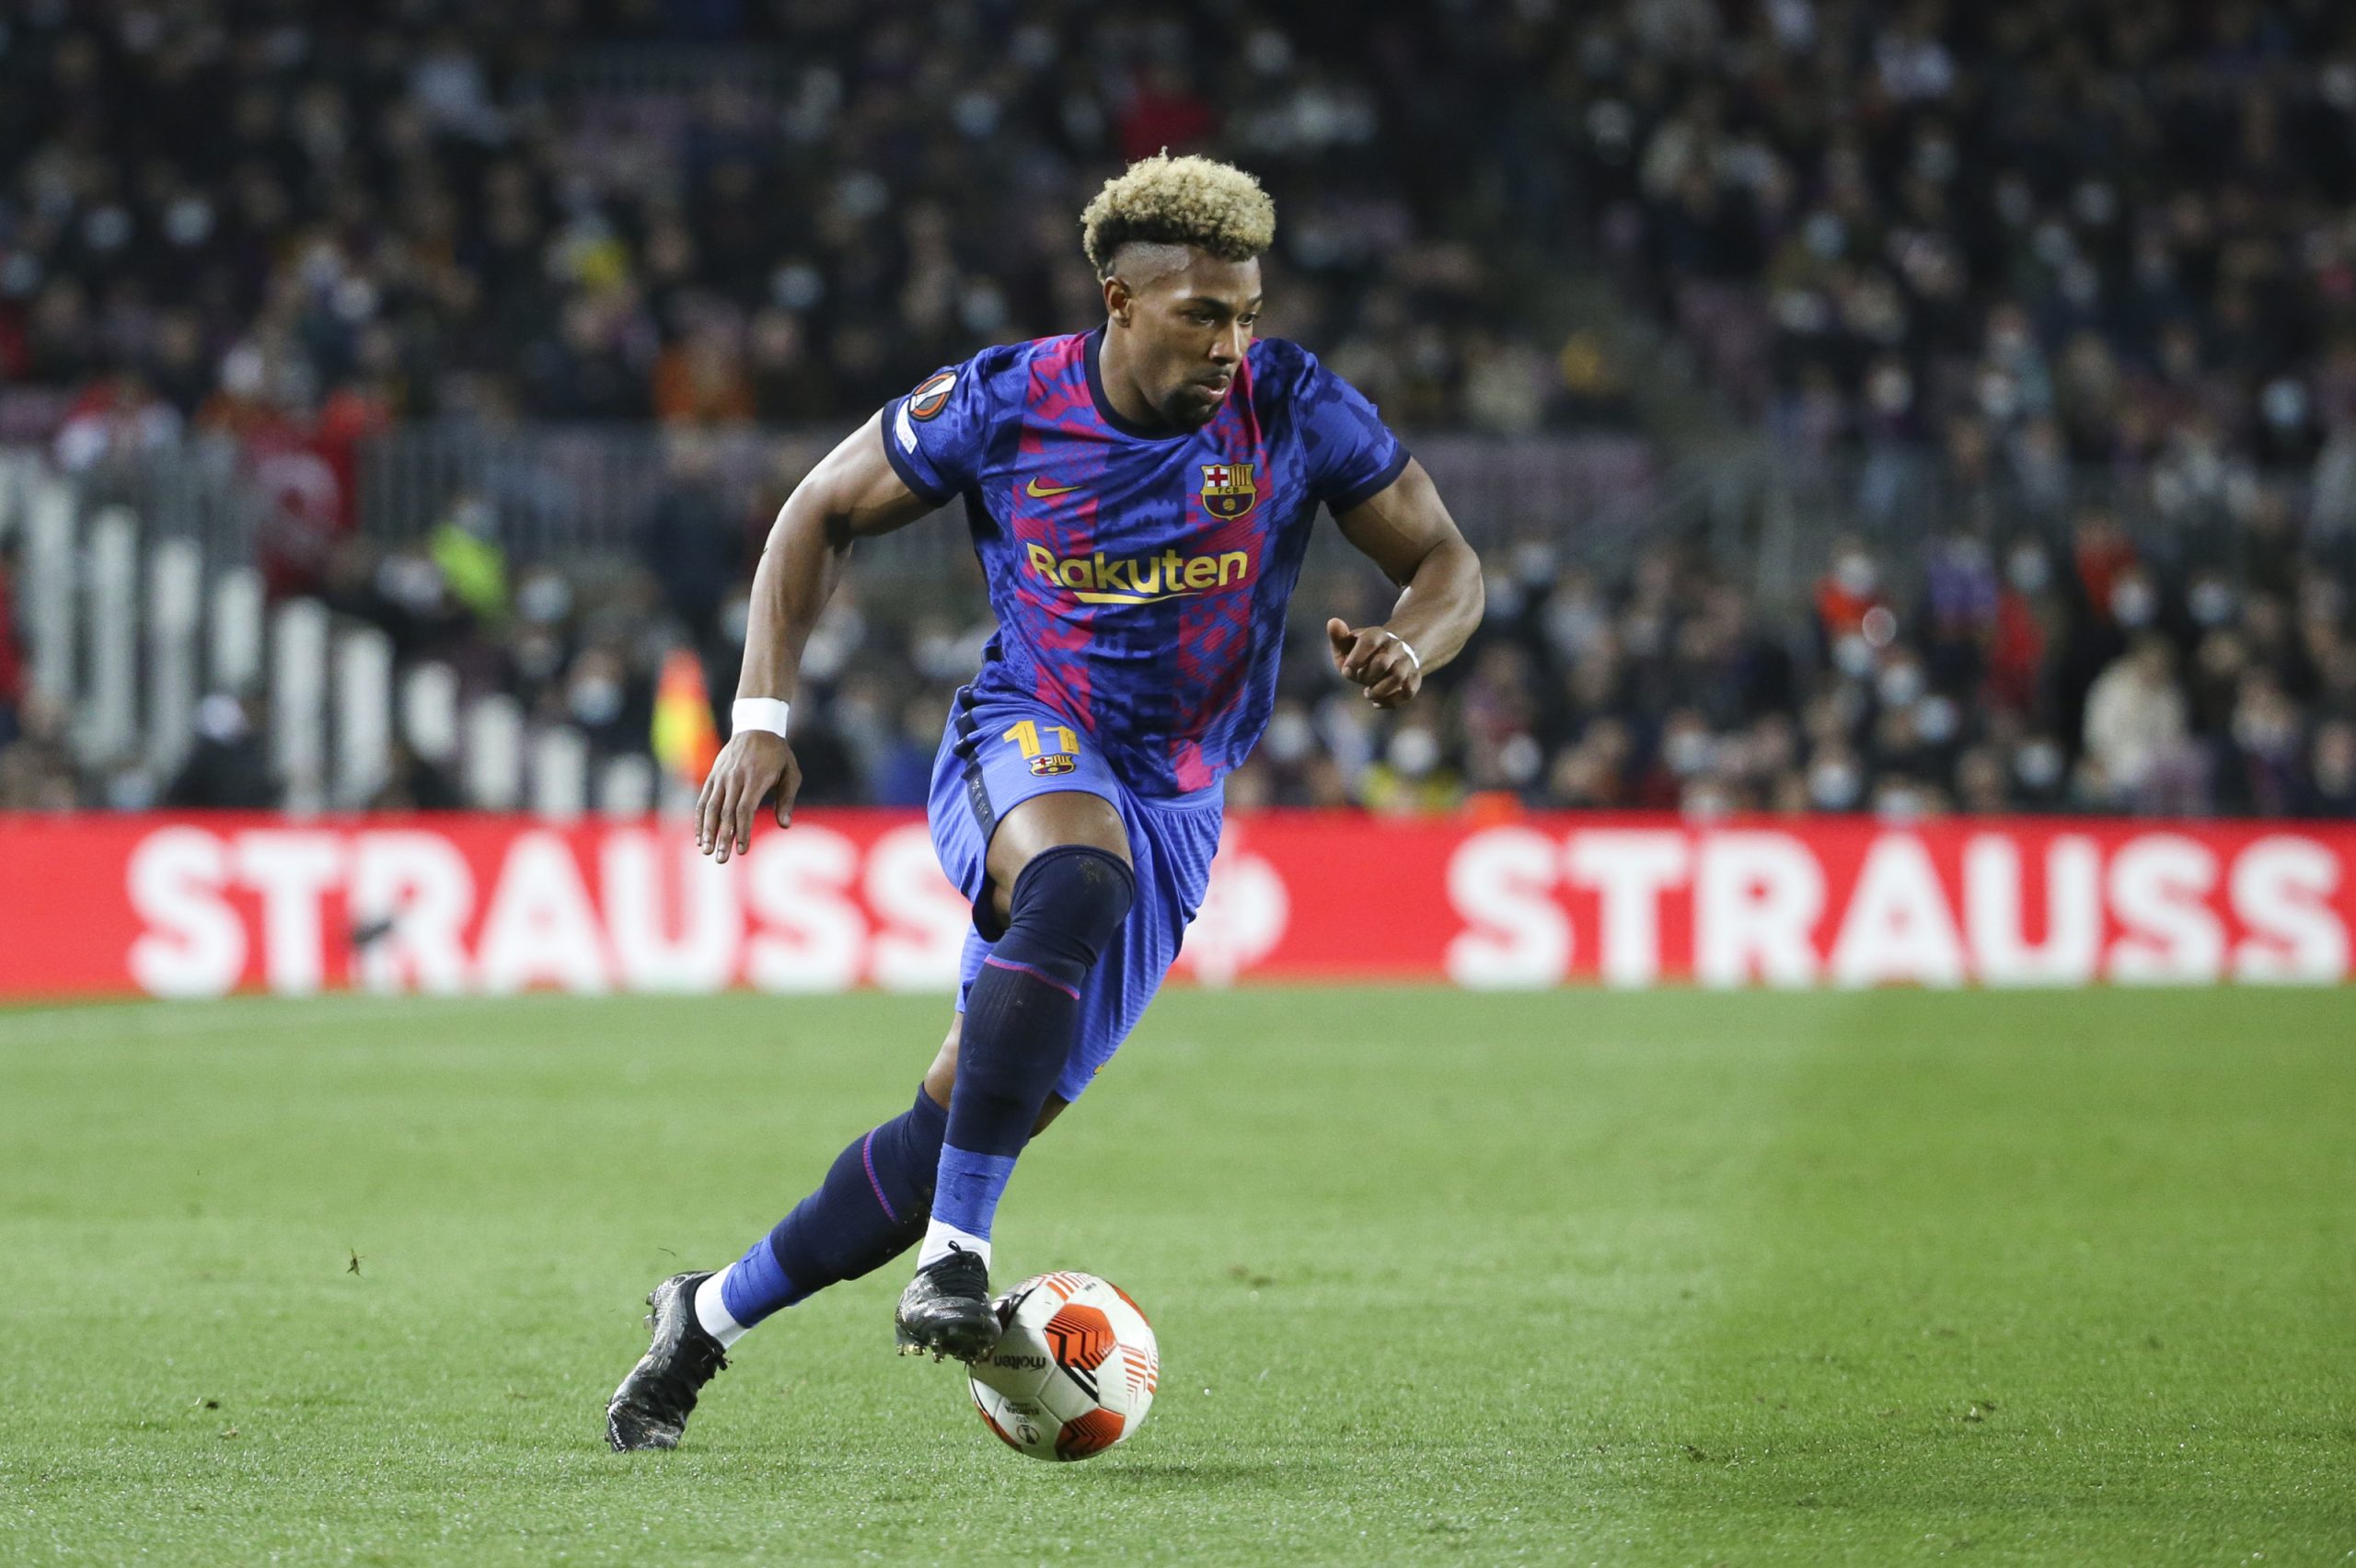 Adama Traore is one of the fastest in the league